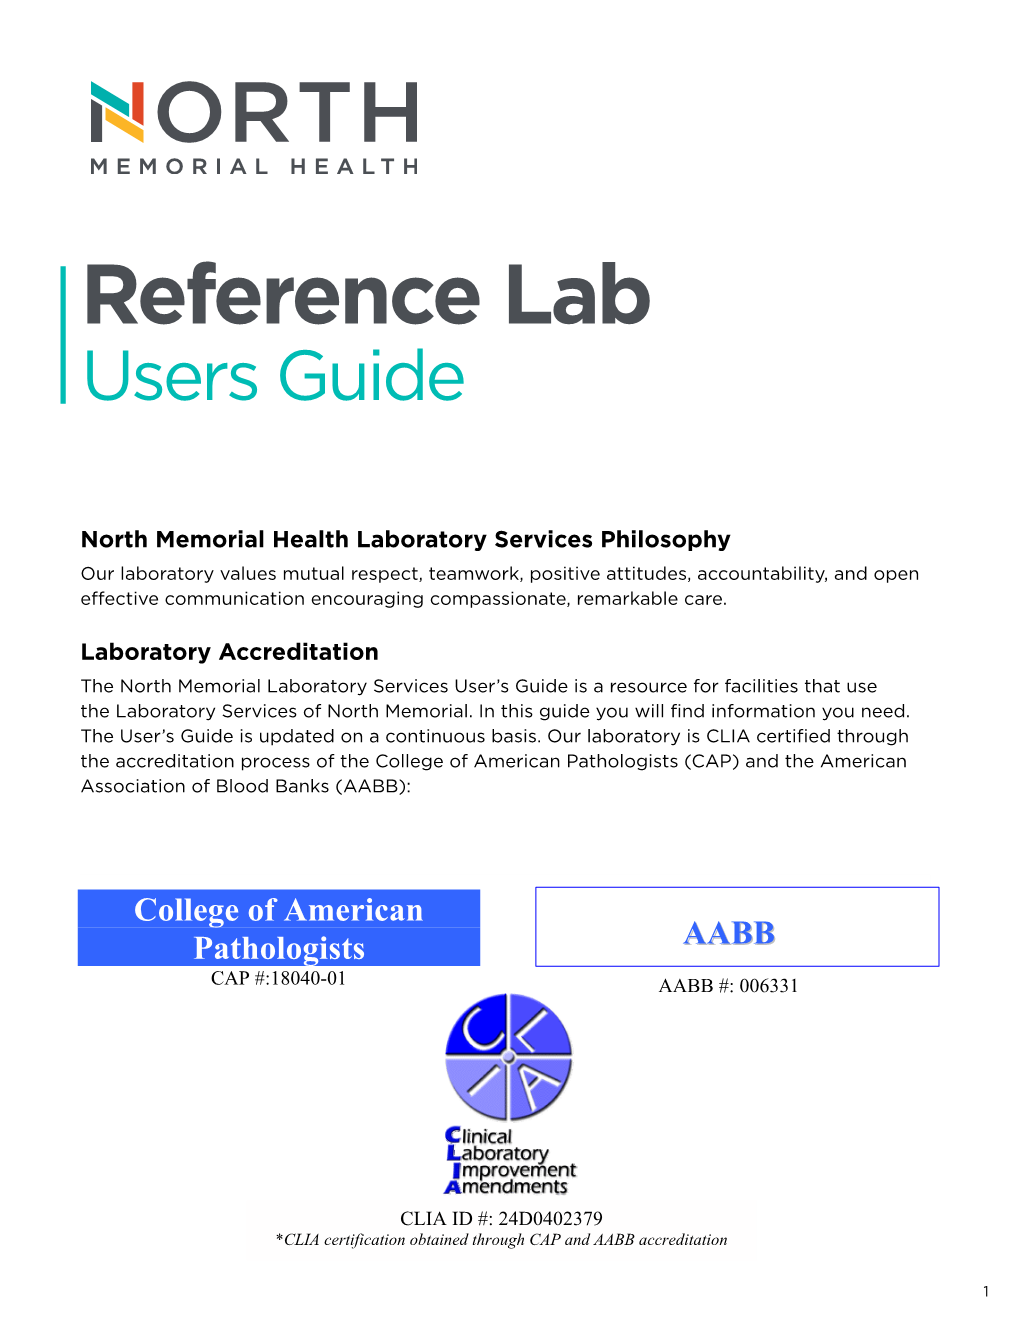 Reference Lab Users Guide